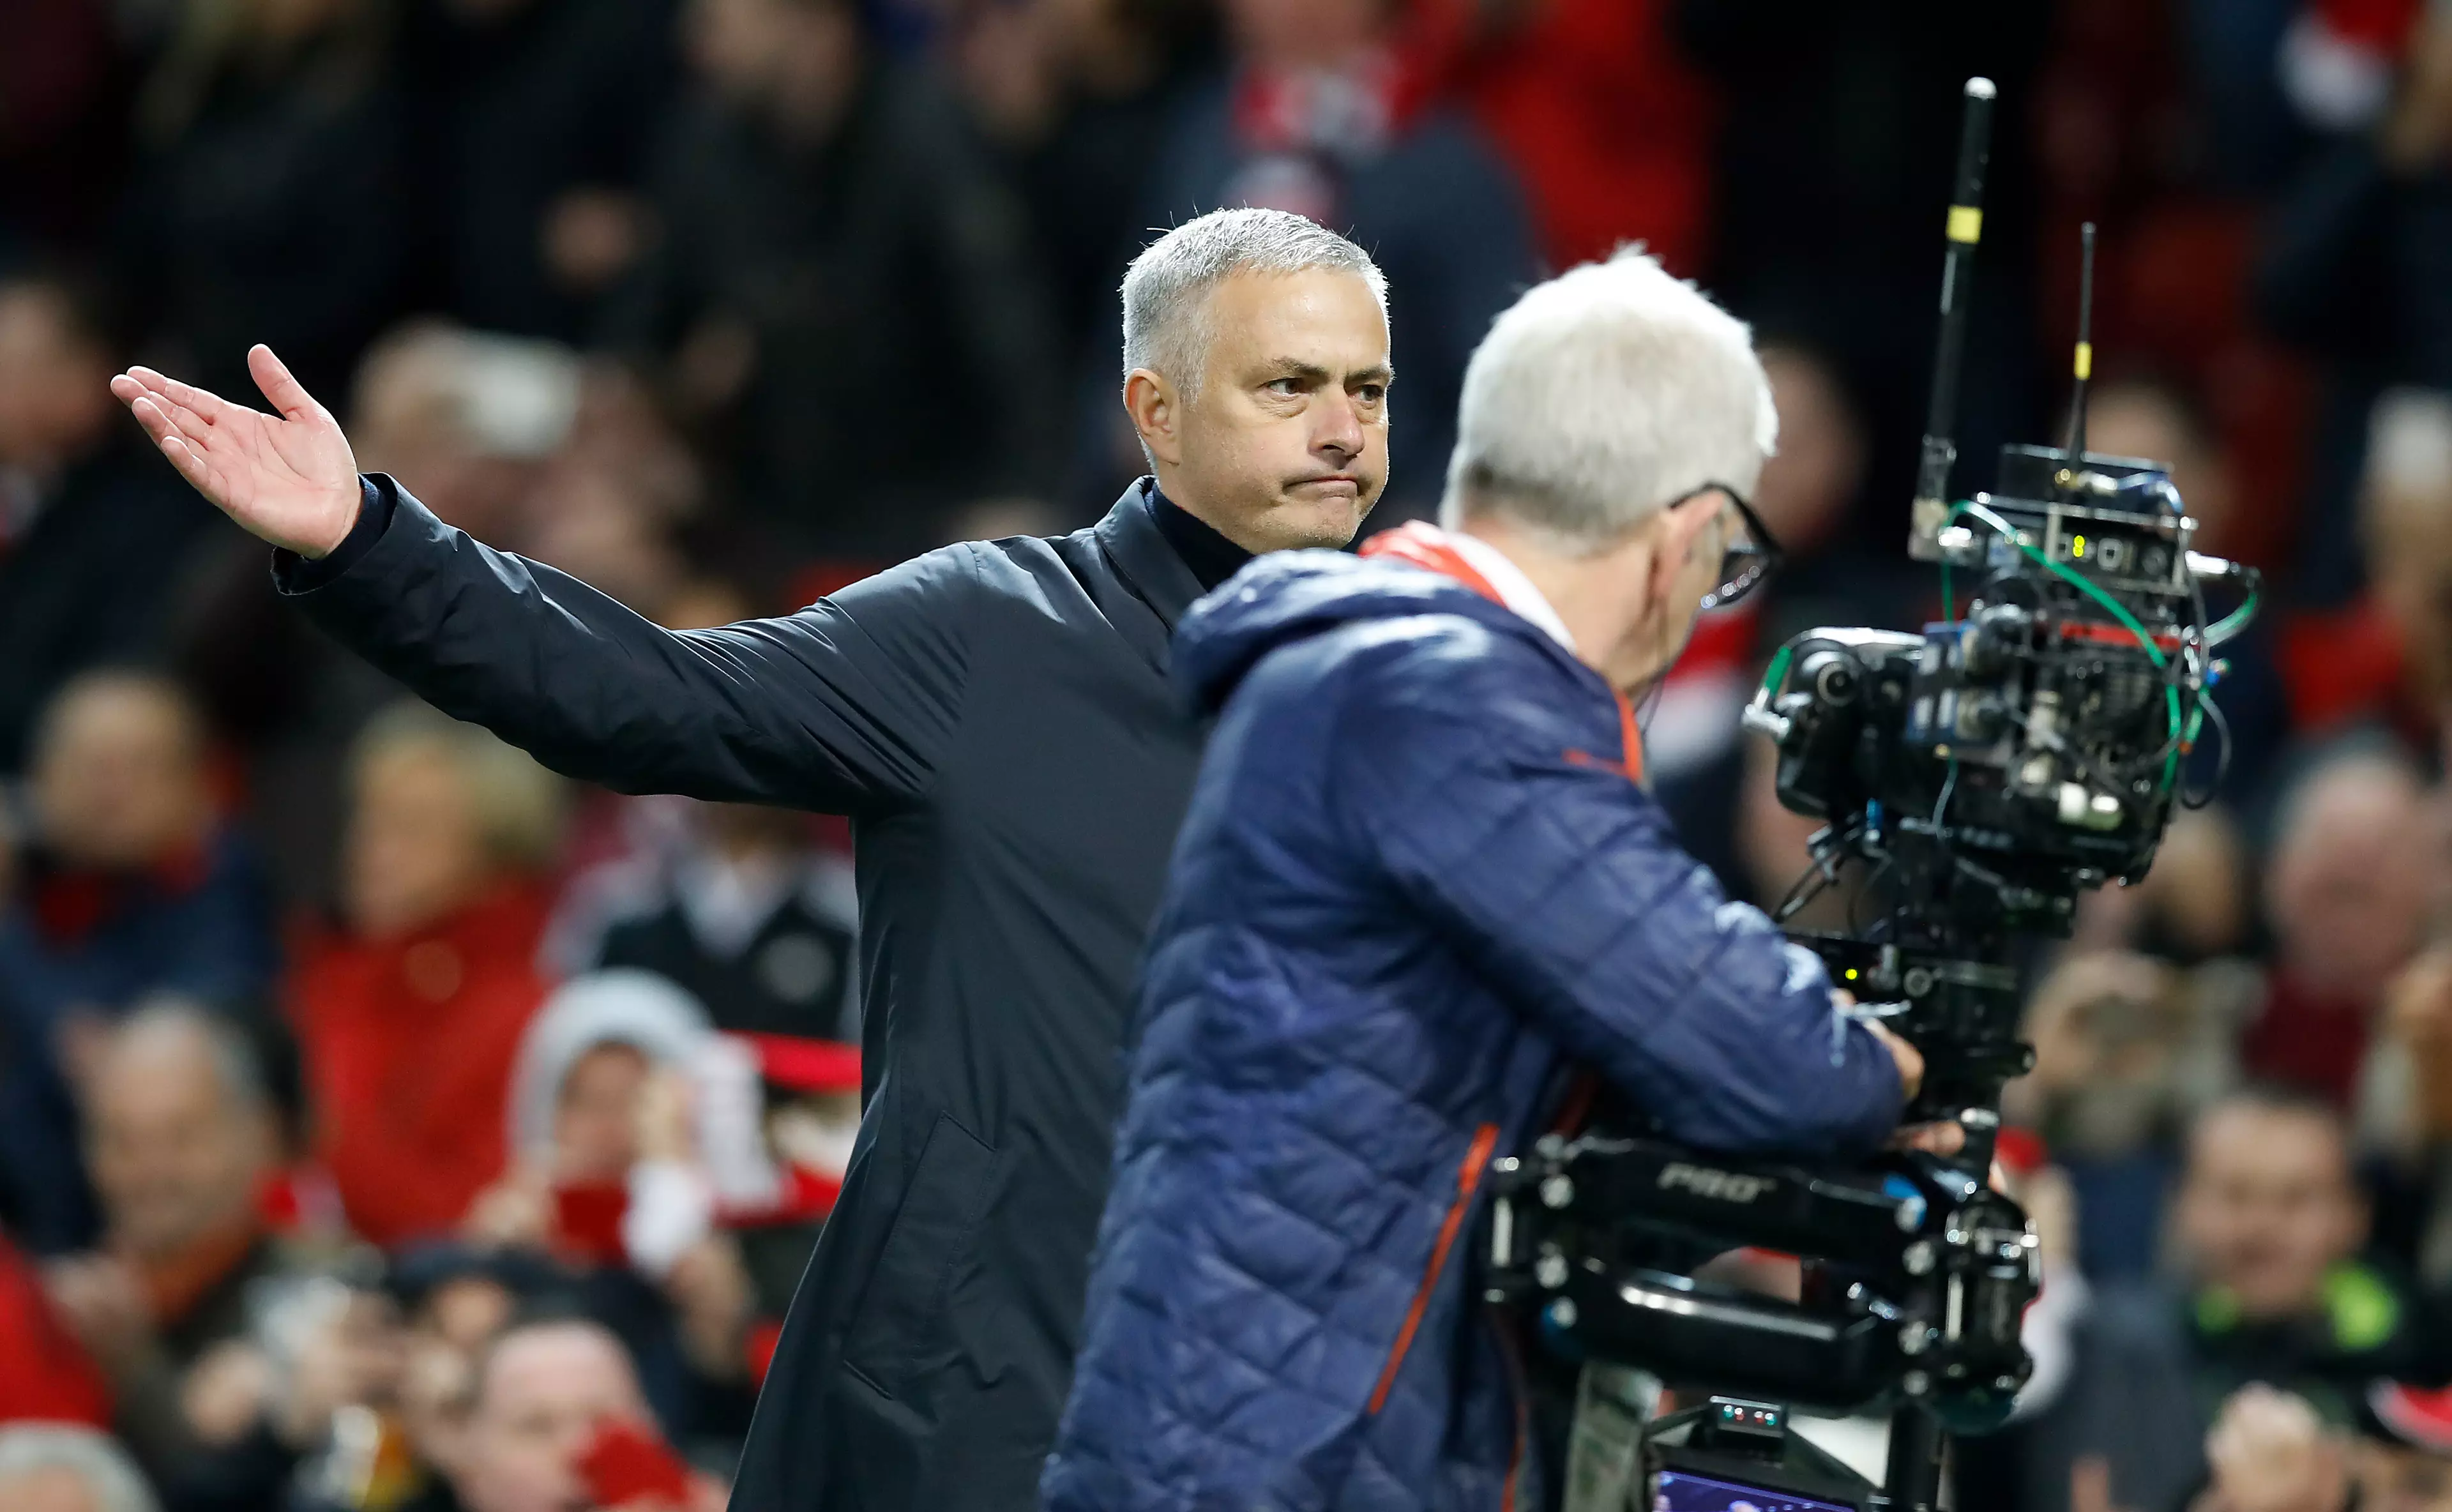 Mourinho walks off at full time. Image: PA Images